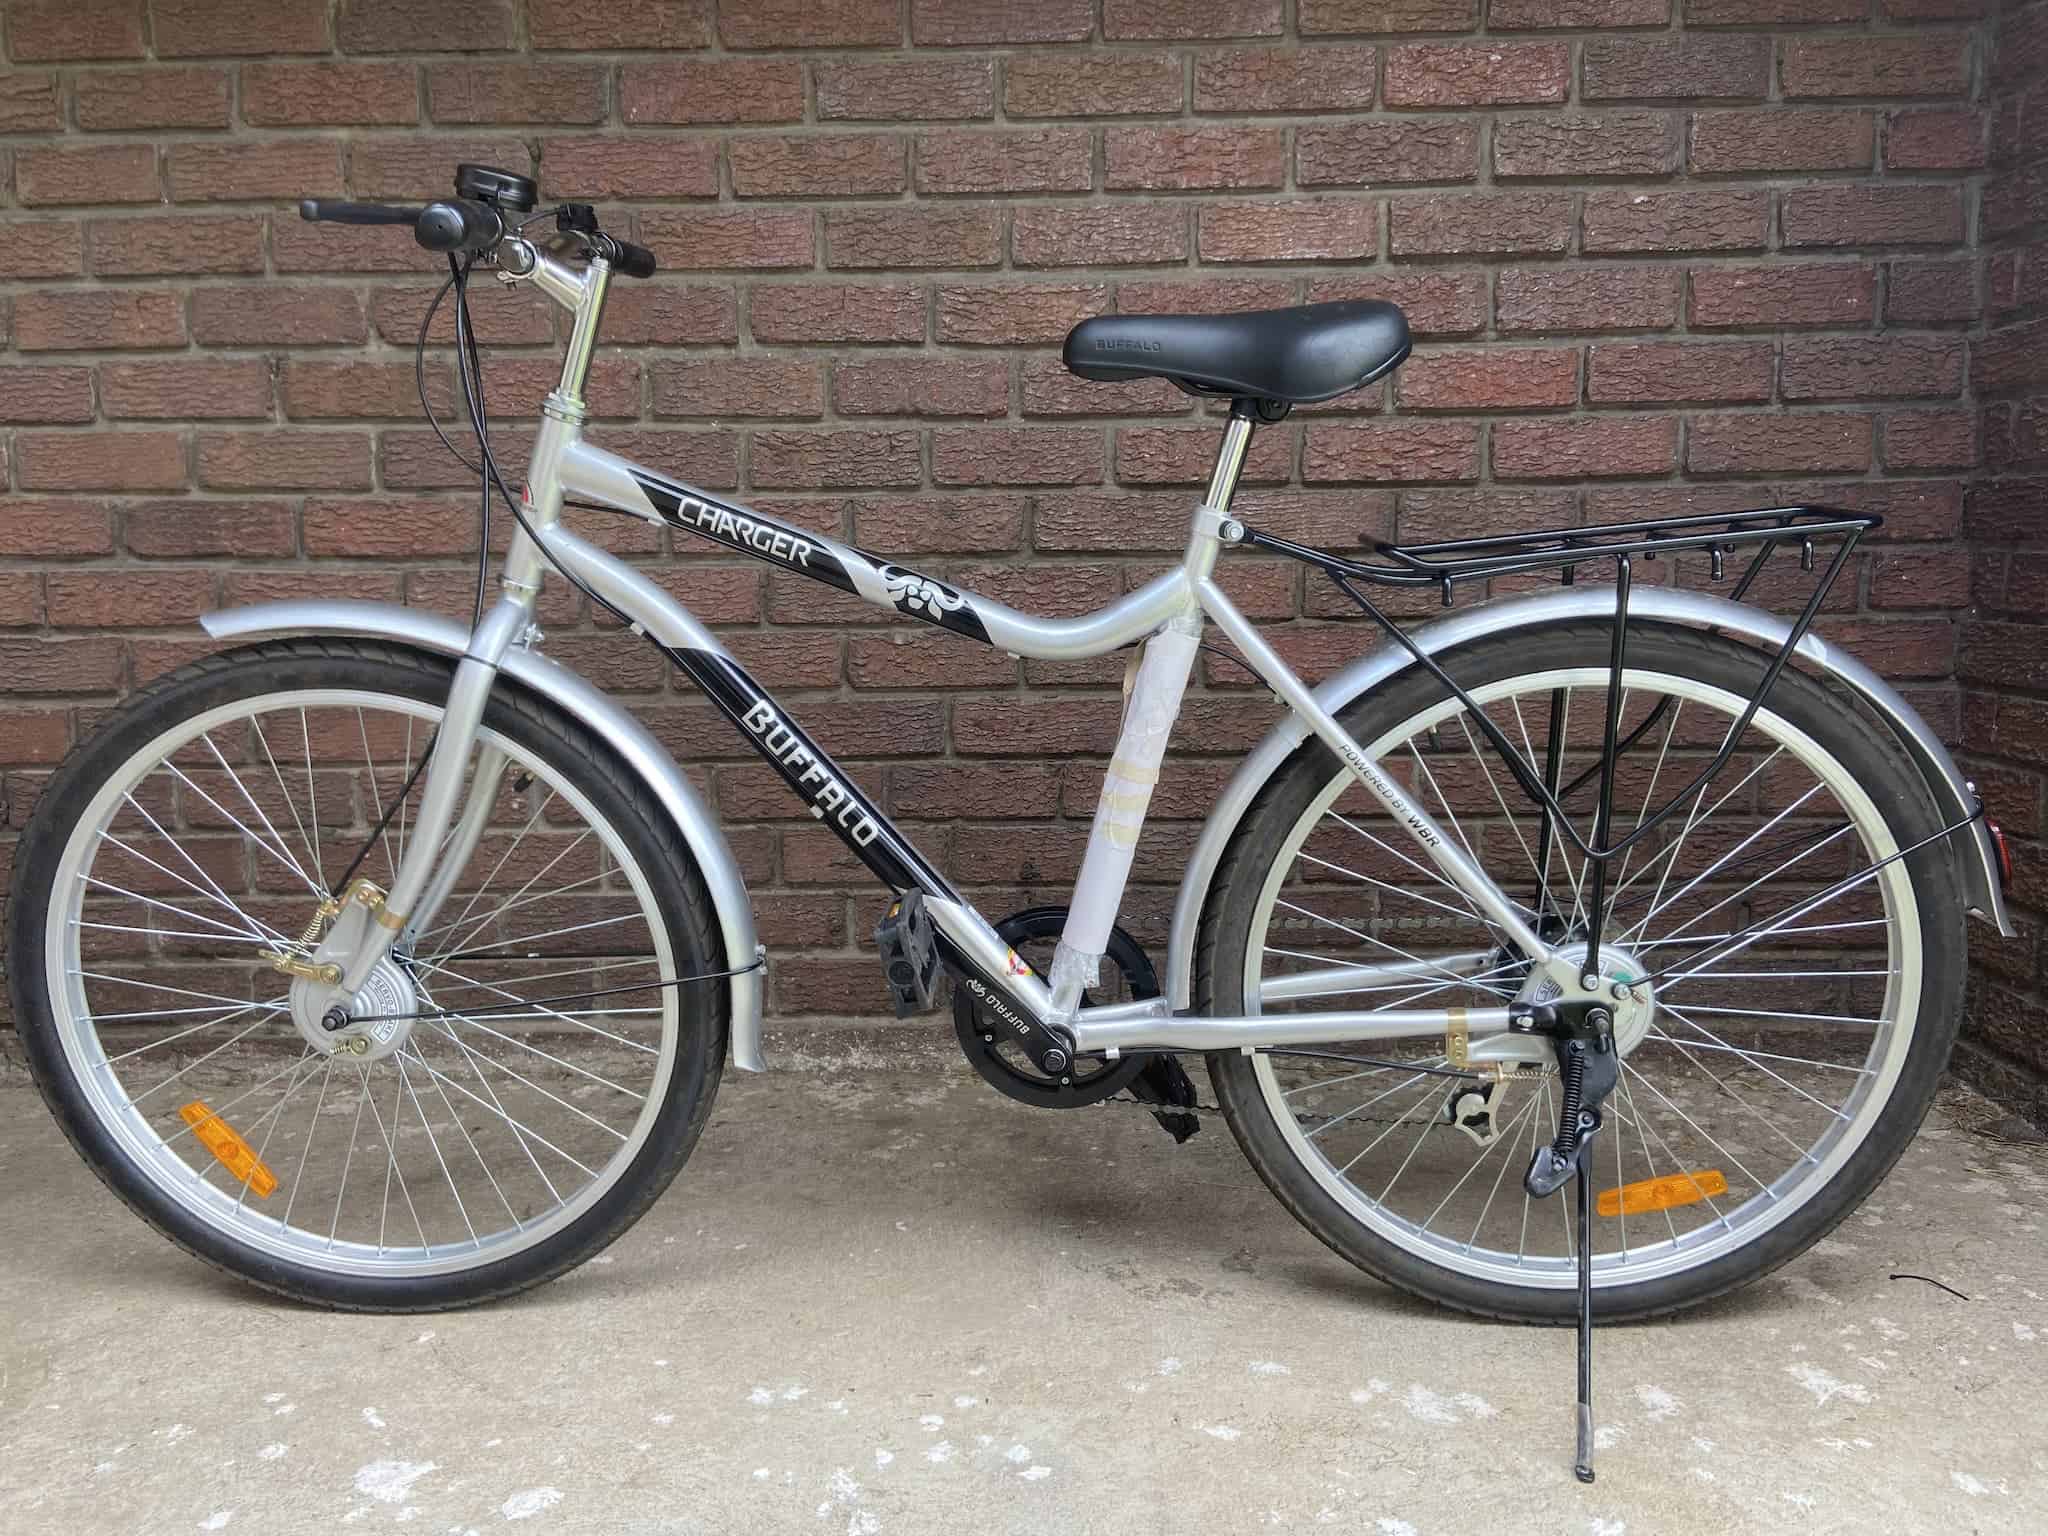 A silver bicyle with buffalo charger branding against a brick wall